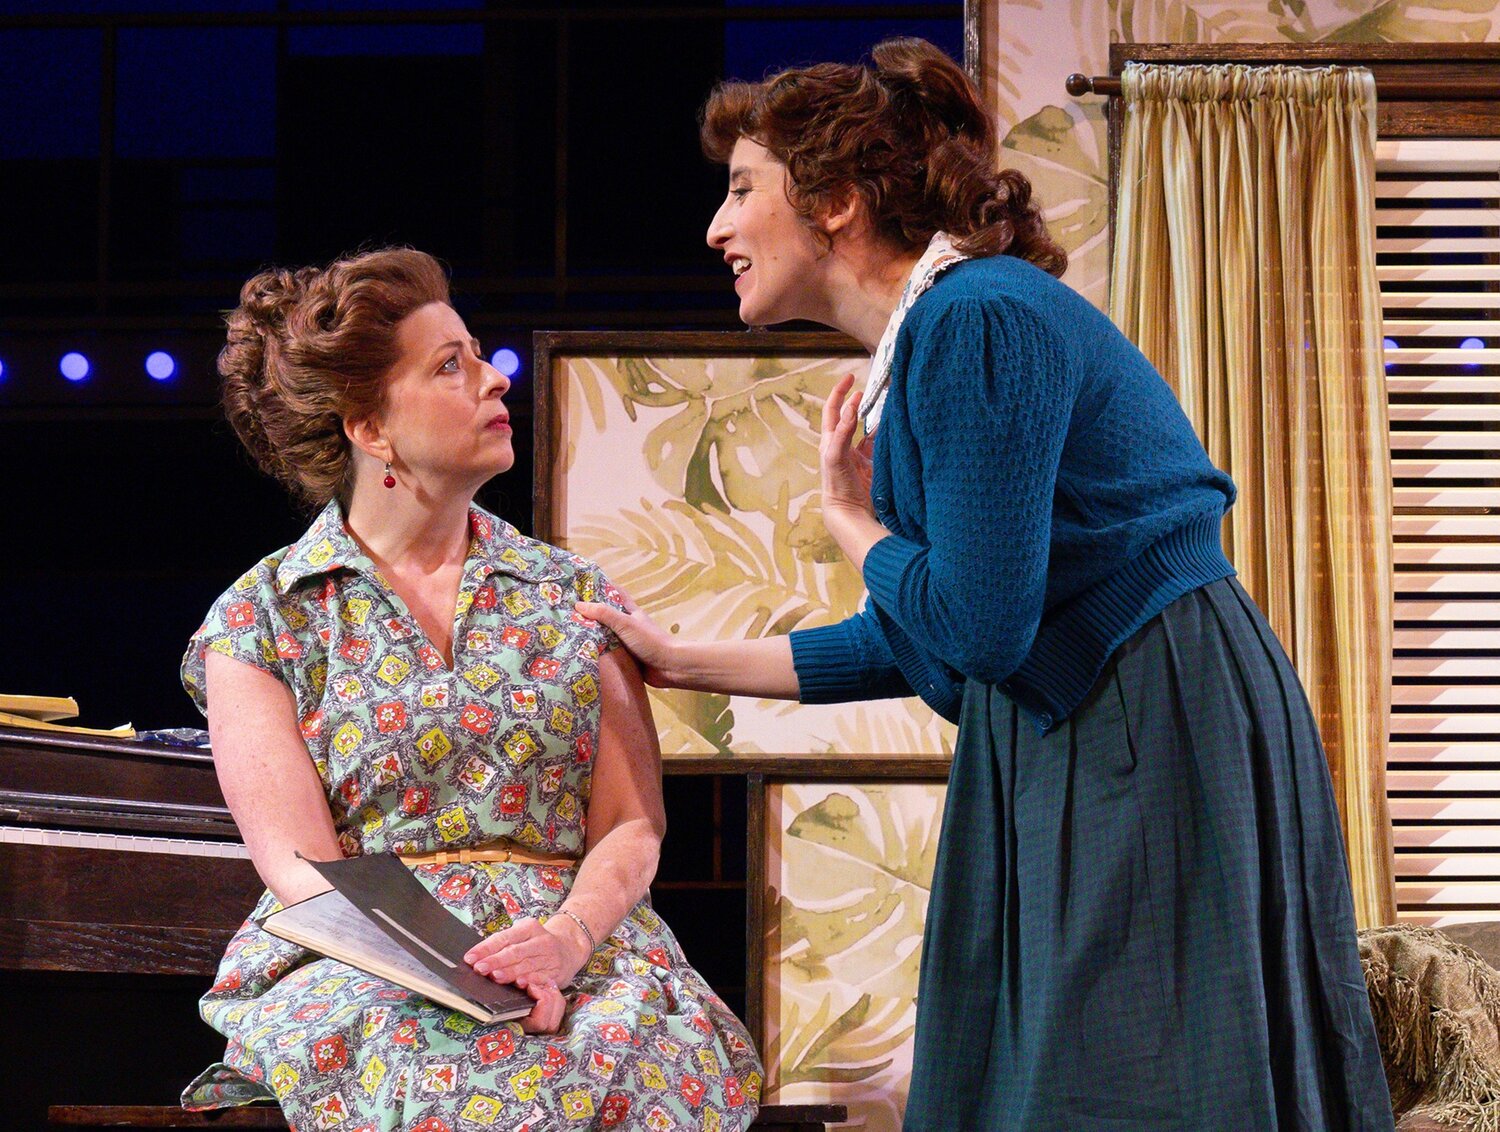 Council Rock product Sabrina Profitt, left, as Genie Klein, works with Sara Sheperd as Carole King in “Beautiful — The Carole King Story” in April at the Walnut Street Theatre in Philadelphia.